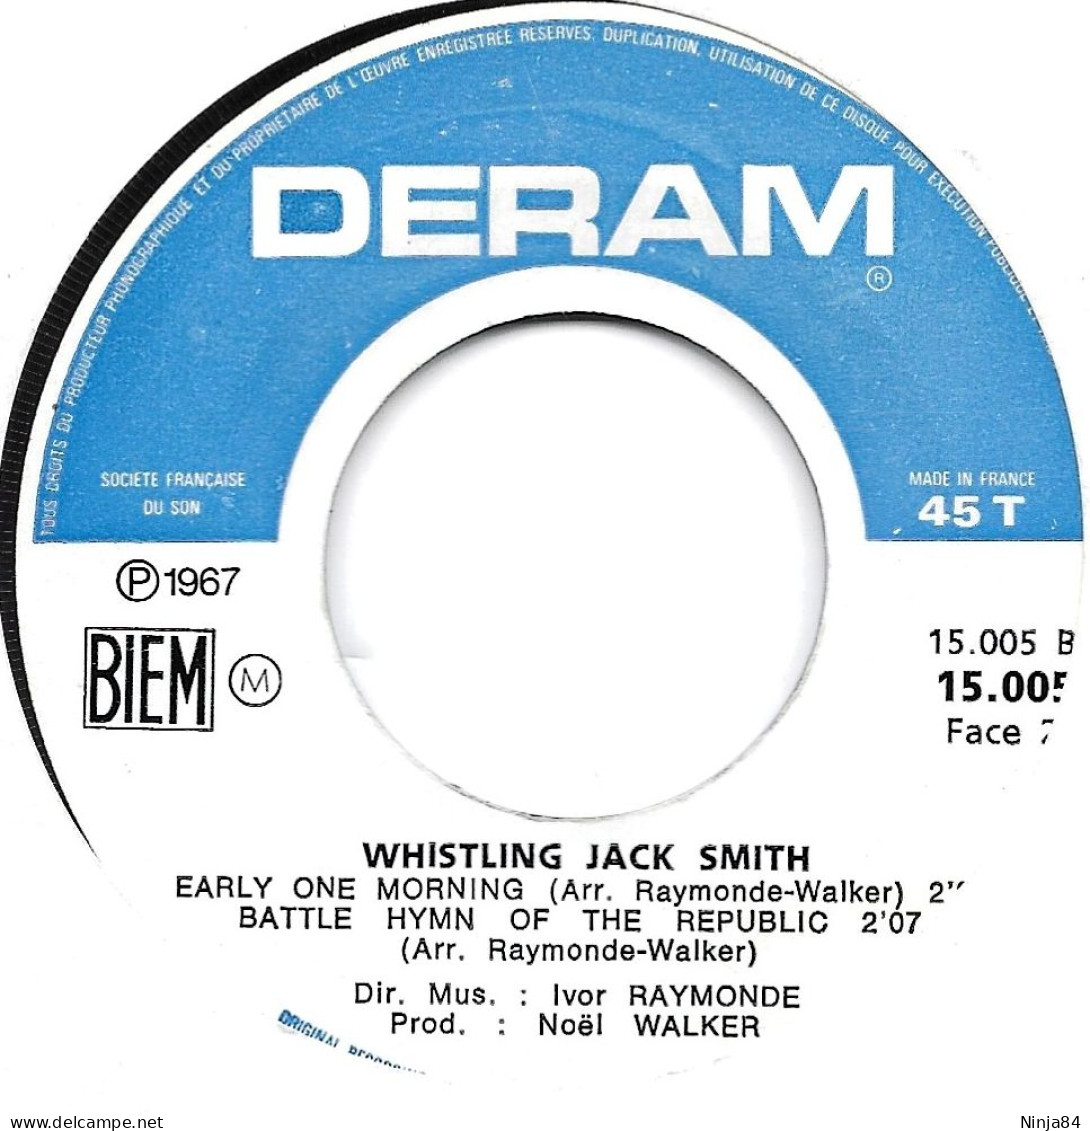 EP 45 RPM (7") Whistling Jack Smith  " Hey There, Little Miss Mary  " - Autres - Musique Anglaise